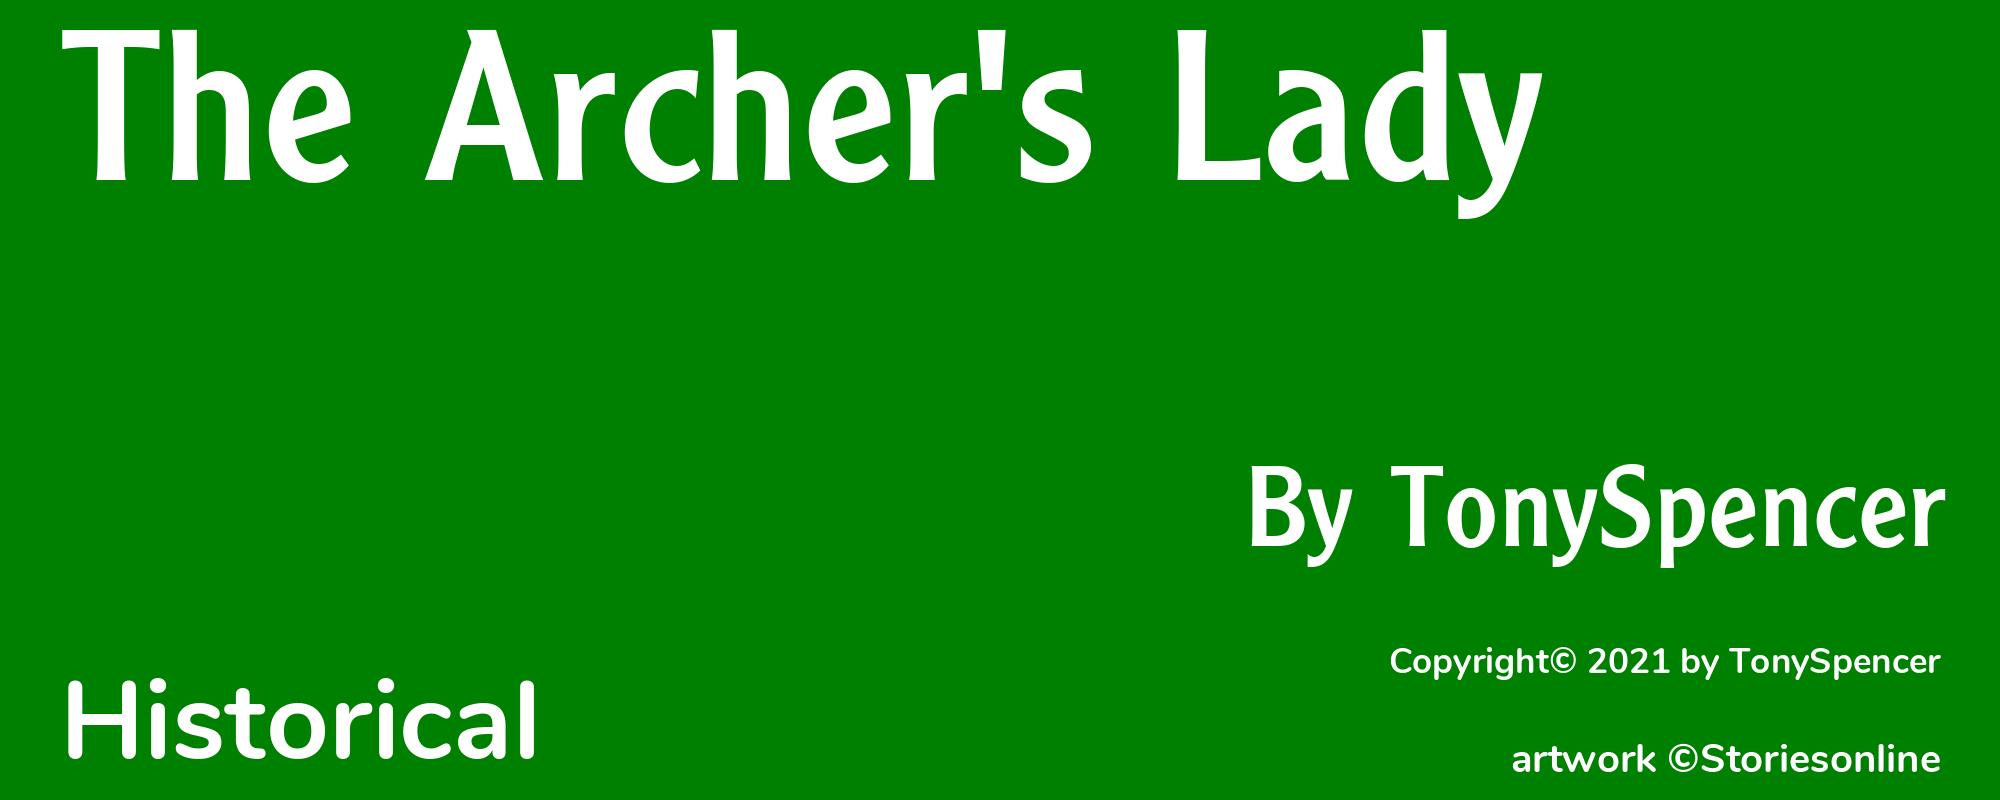 The Archer's Lady - Cover